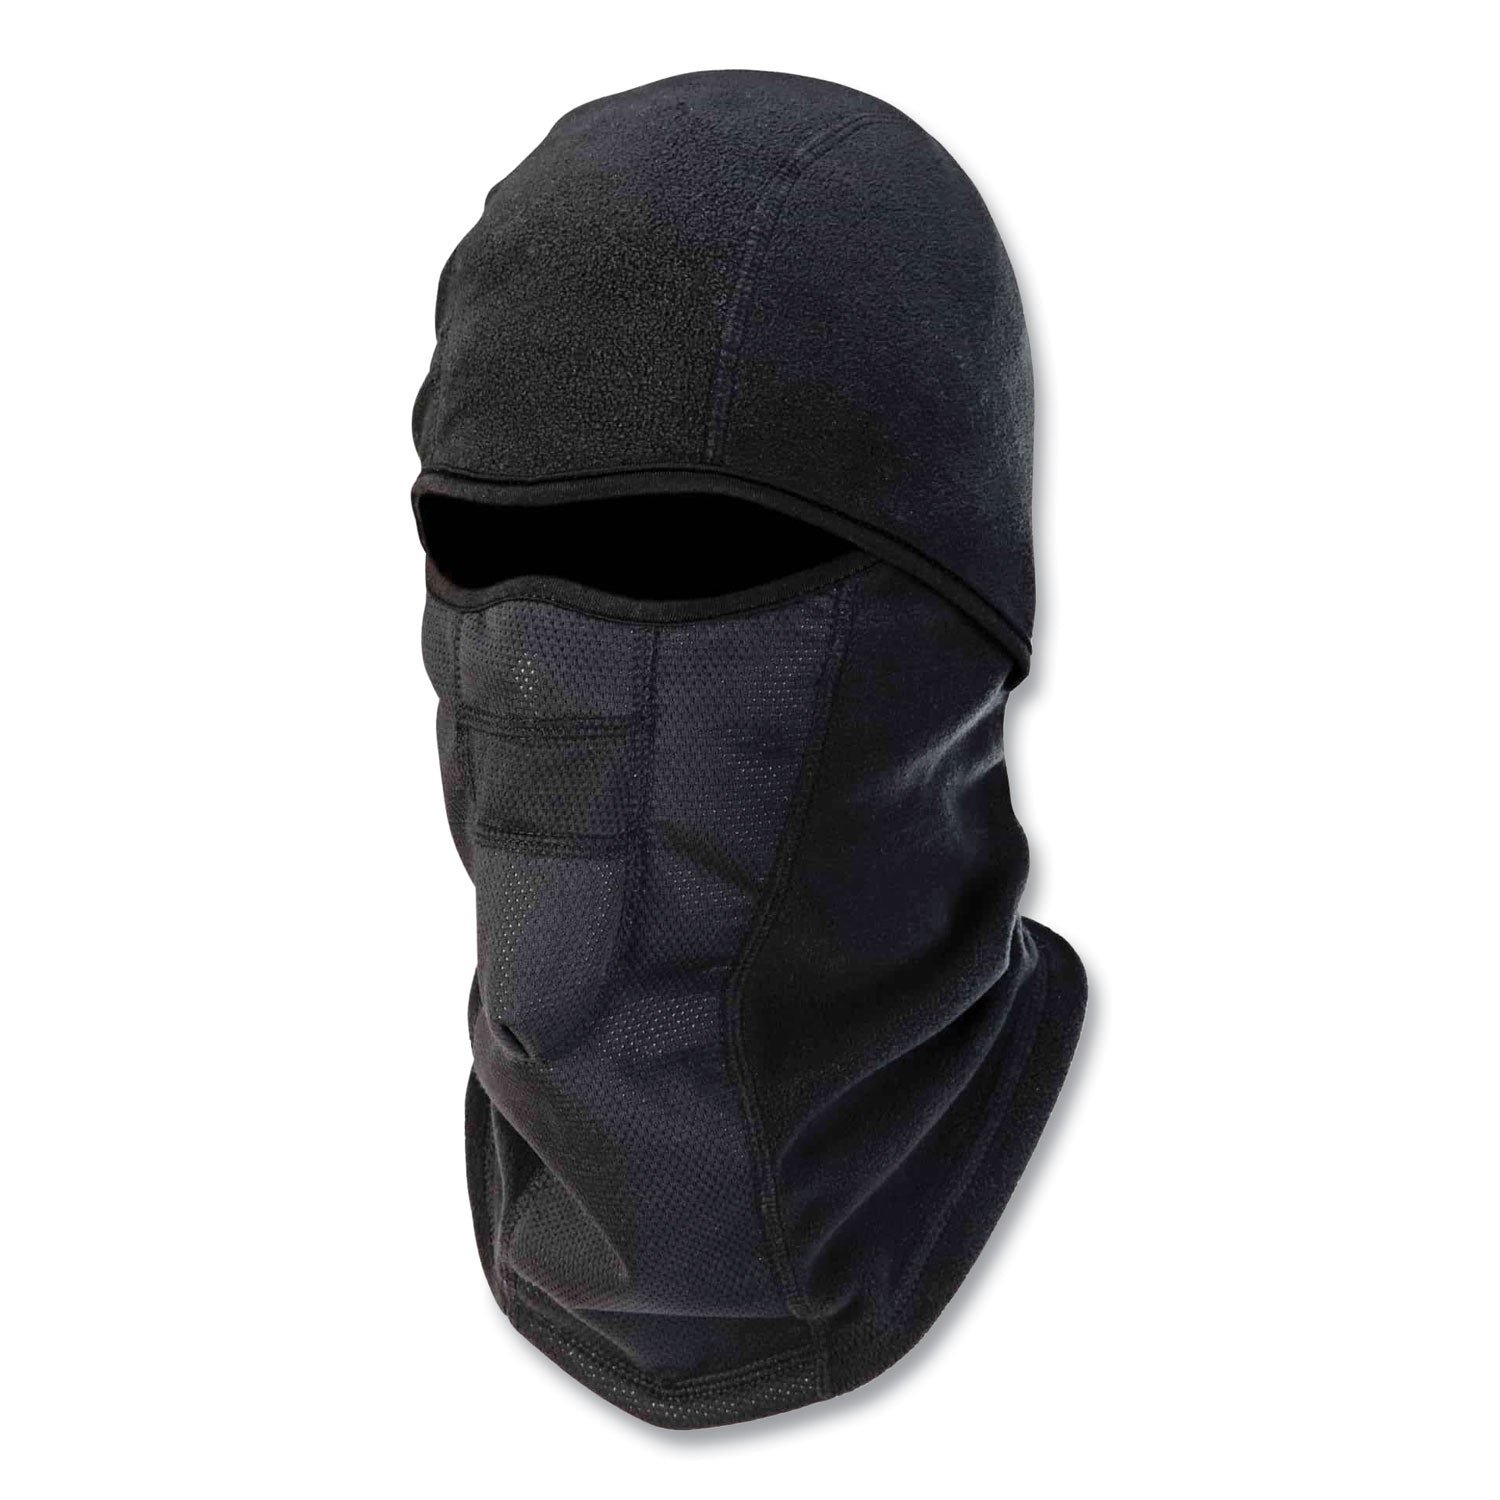 n-ferno-6823-hinged-balaclava-face-mask-fleece-one-size-fits-most-black-ships-in-1-3-business-days_ego16823 - 1